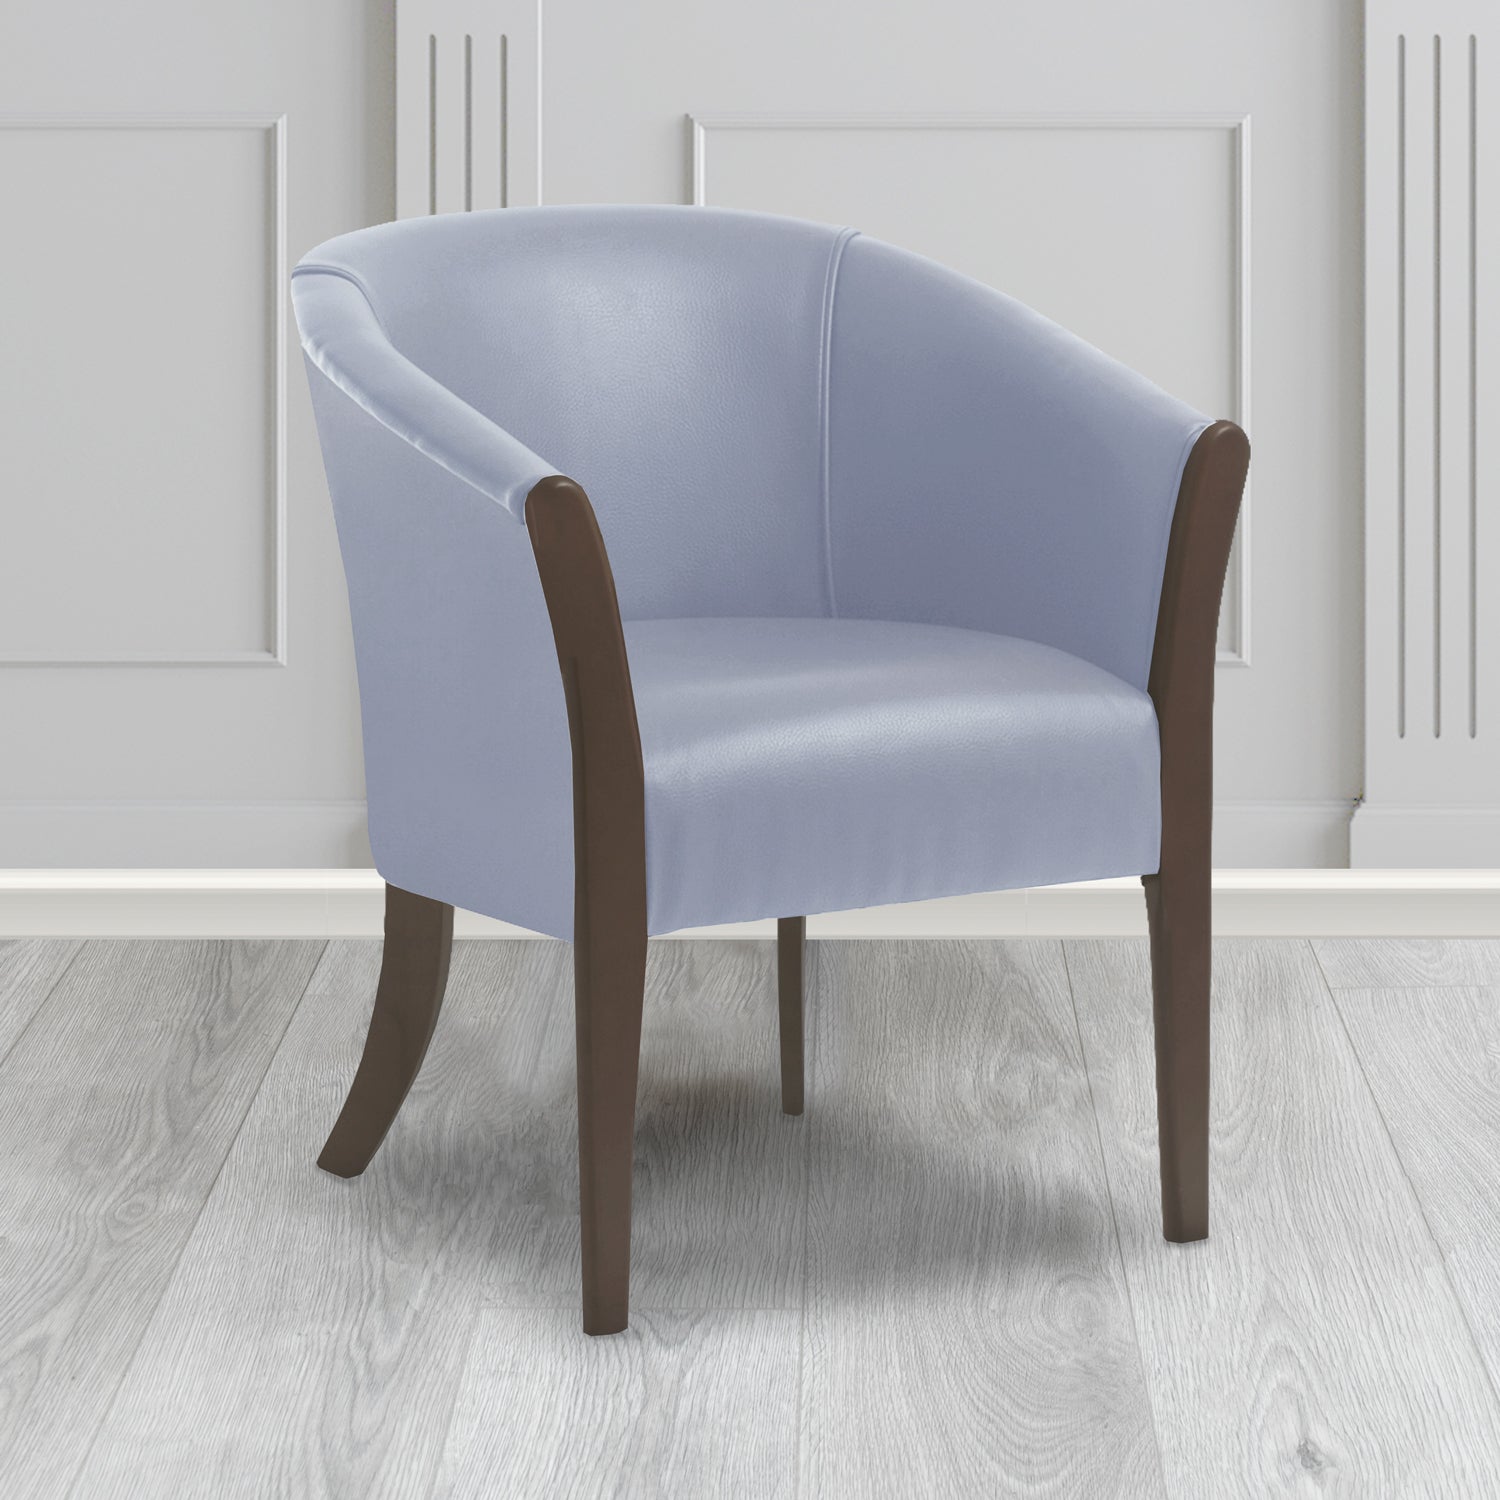 Hamilton Tub Chair in Agua Paint Pot Wedgwood Crib 5 Faux Leather - Antimicrobial, Stain Resistant & Waterproof - The Tub Chair Shop